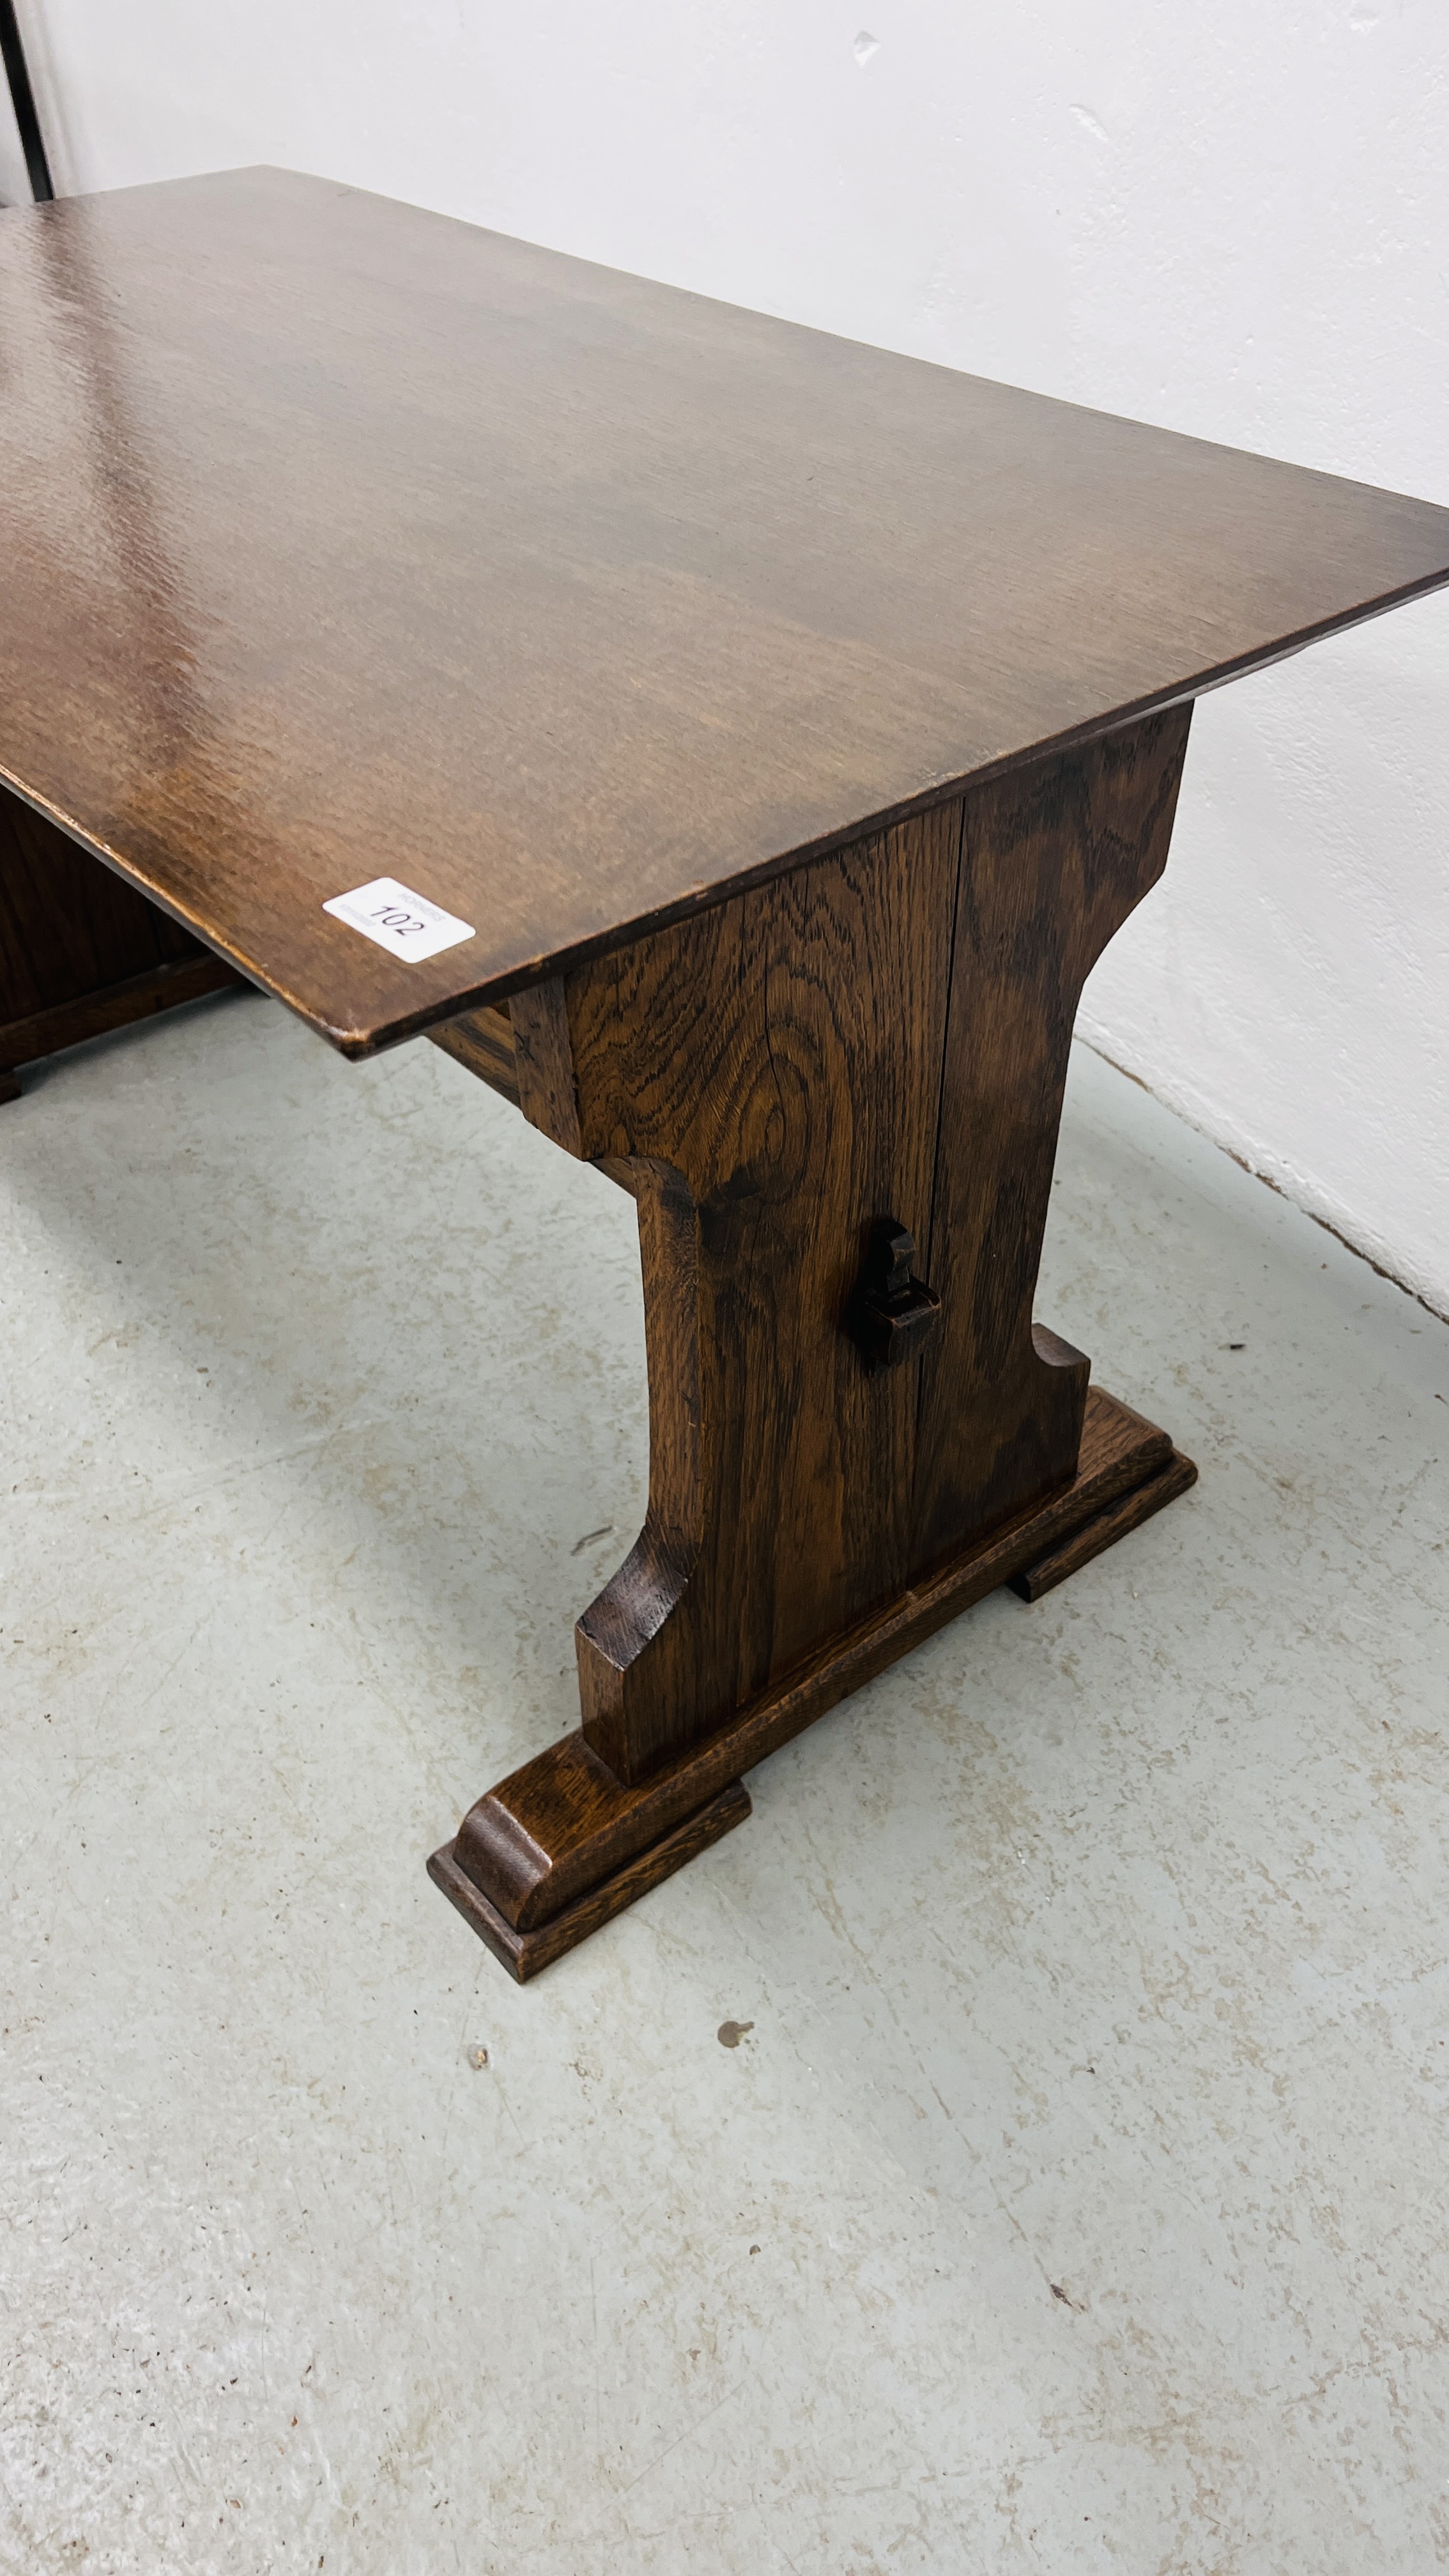 A SOLID OAK REFECTORY STYLE COFFEE TABLE WIDTH 50CM. LENGTH 89CM. HEIGHT 50CM. - Image 6 of 6